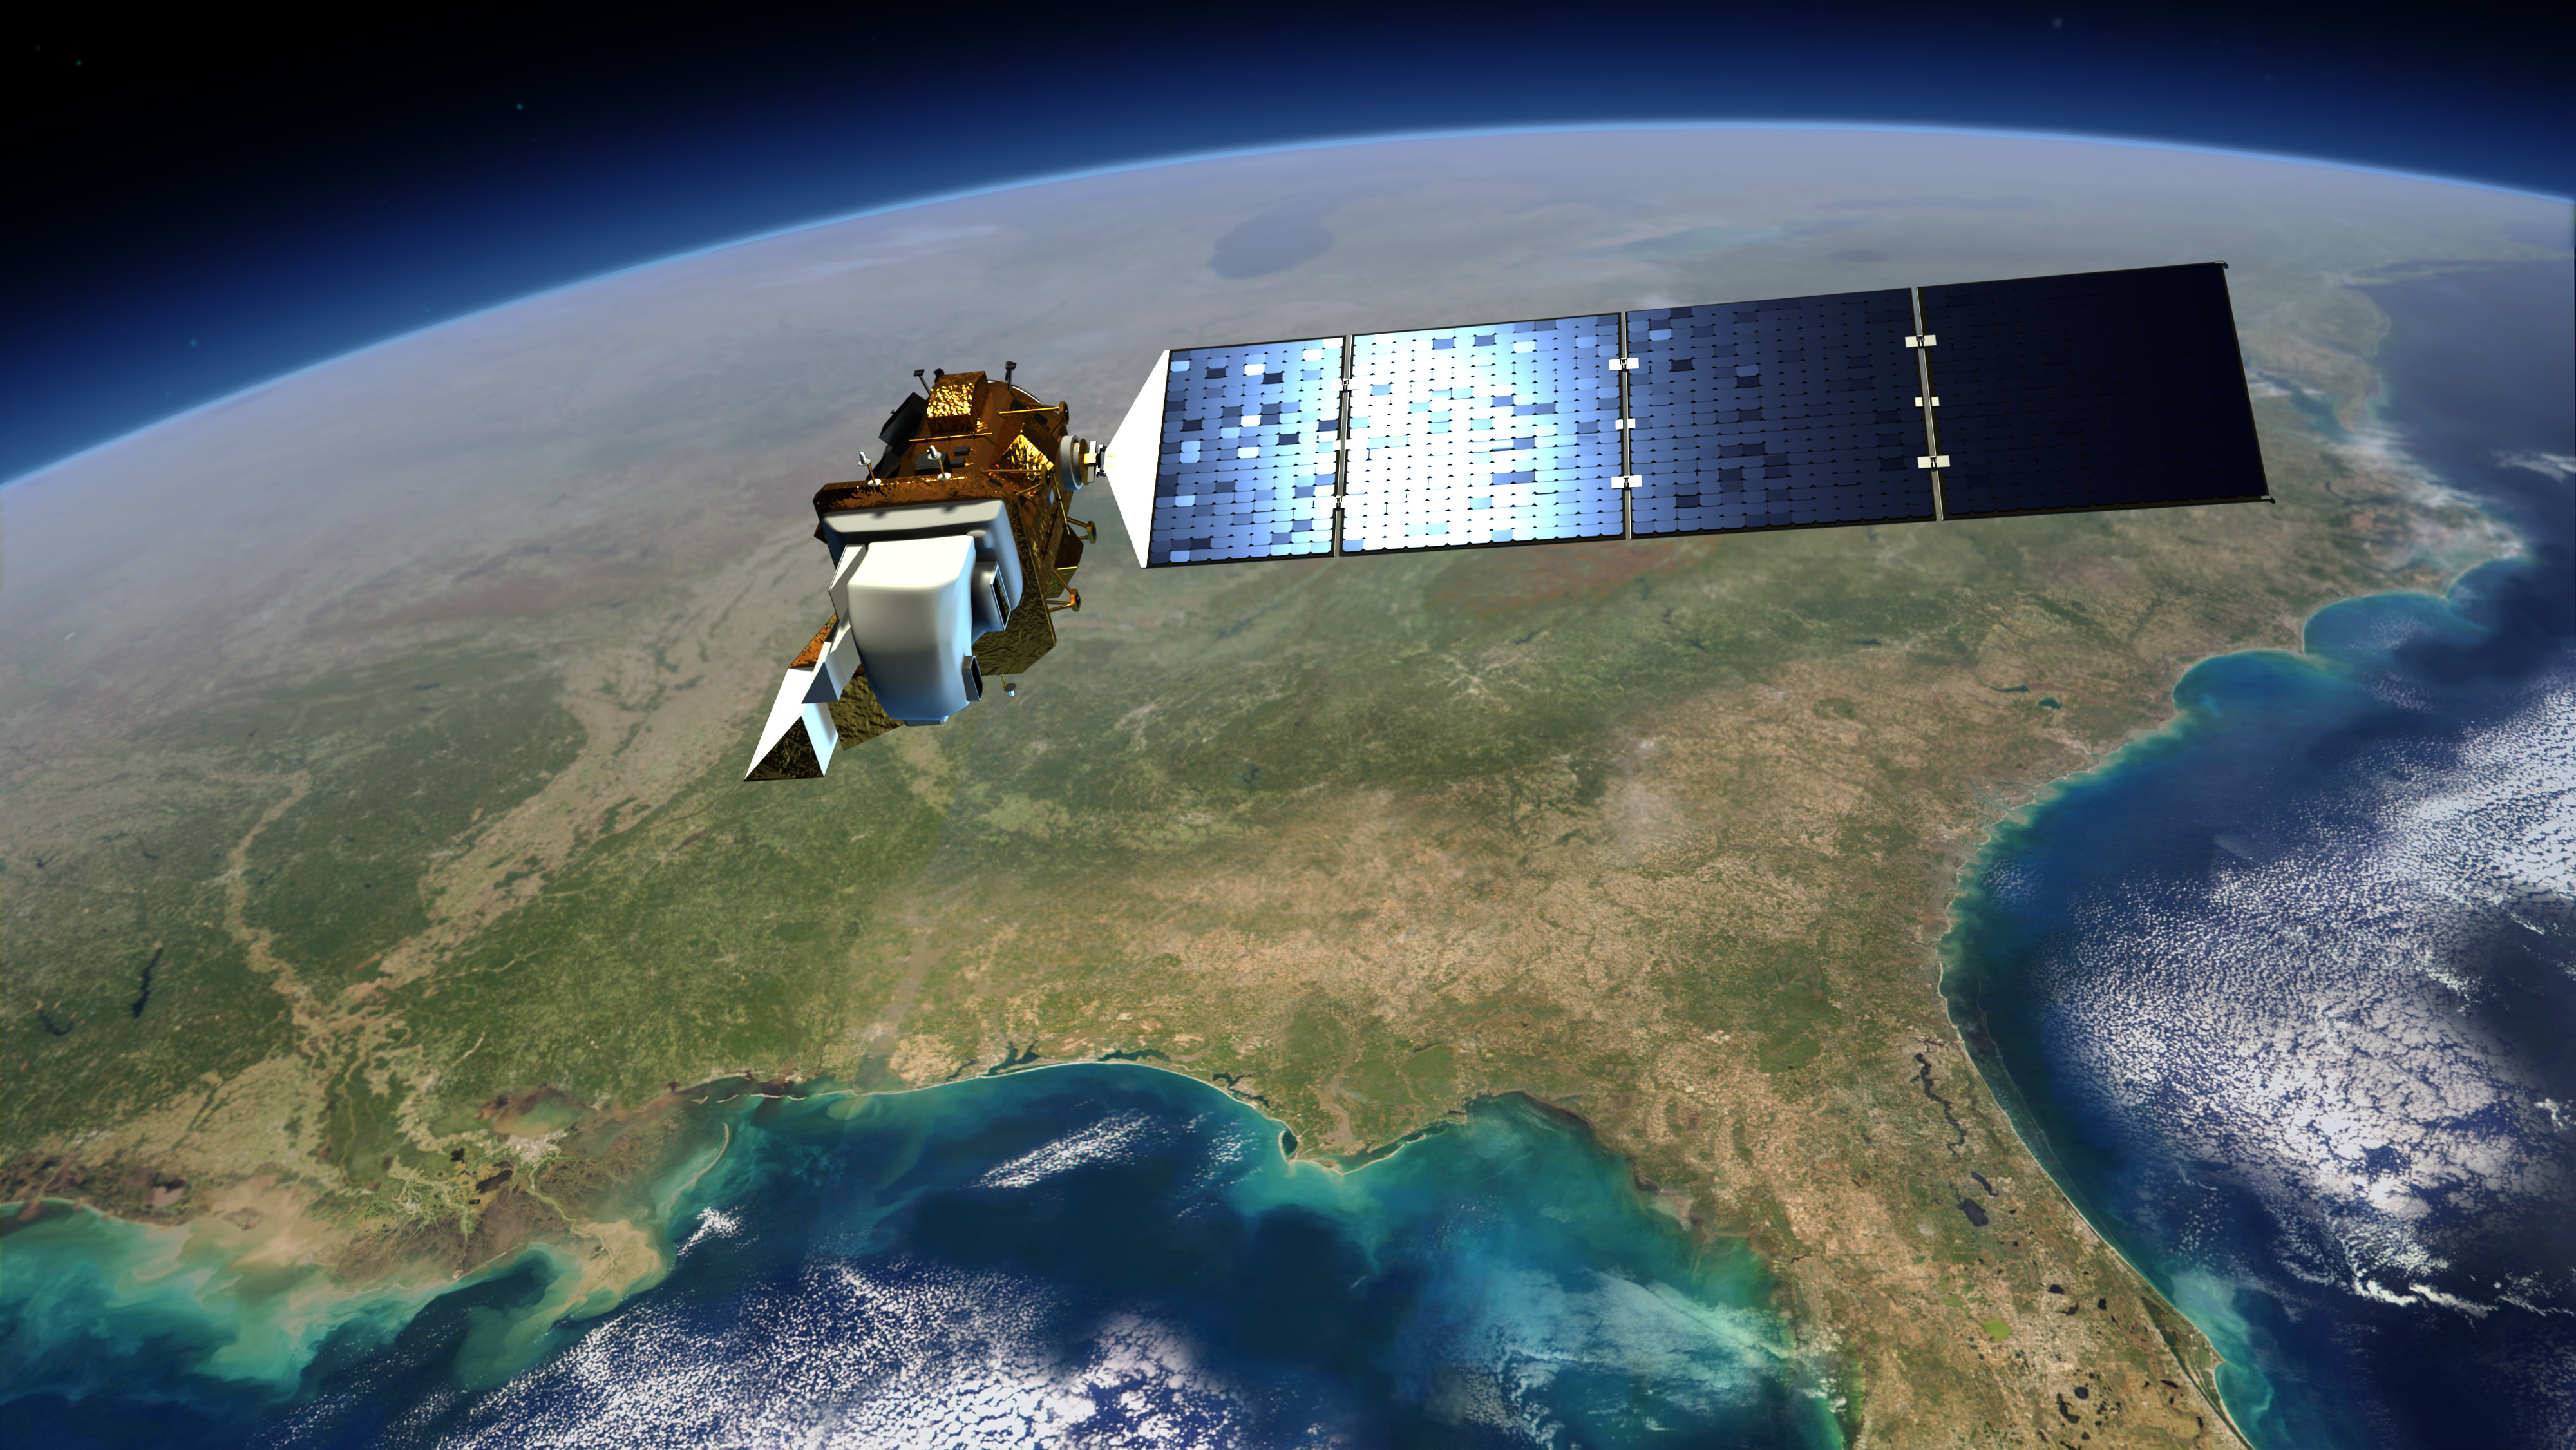 Landsat 8 is one of the few satellites in orbit with a sensor for monitoring water surface temperature.